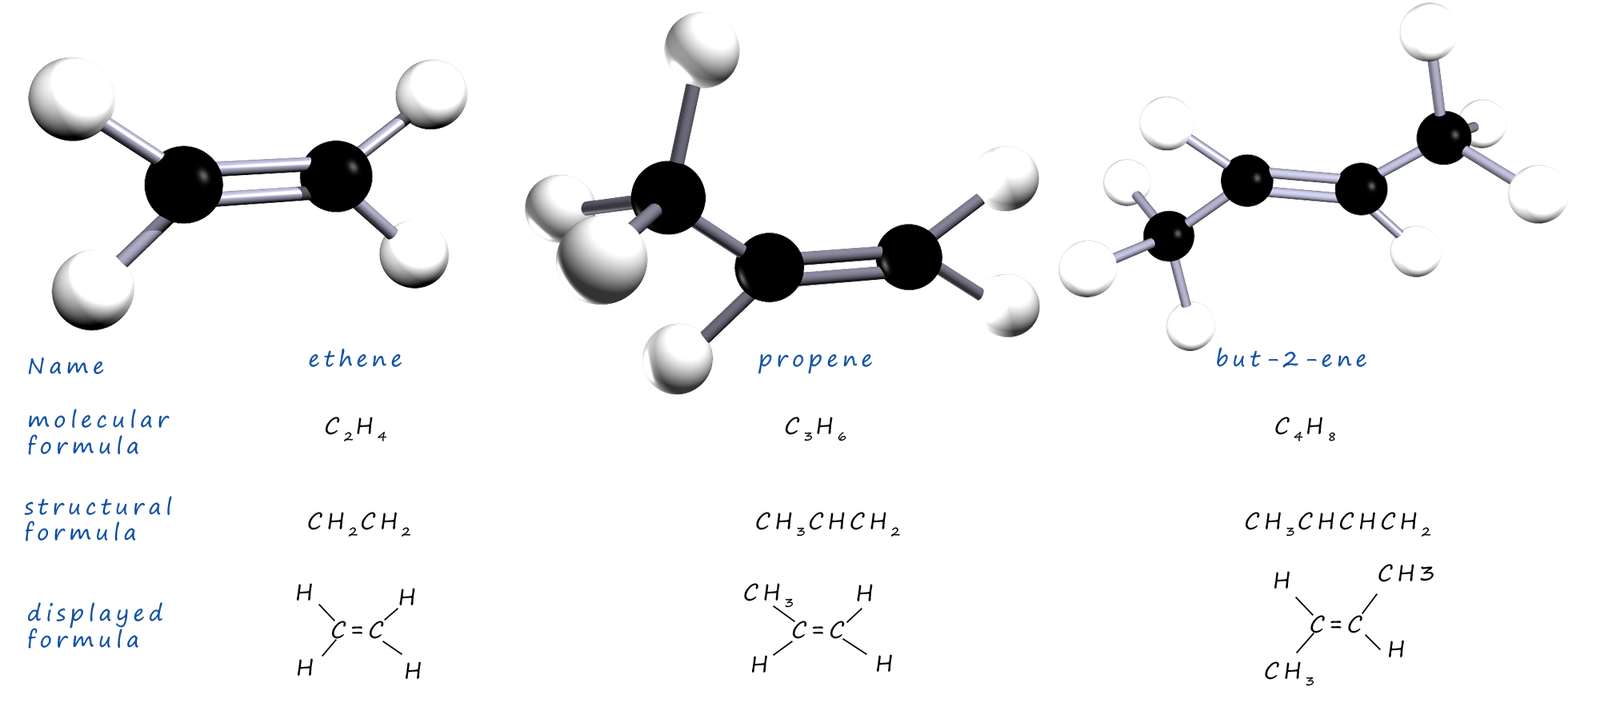 3d models and displayed formula of the first the alkenes ethene, propene and butene.